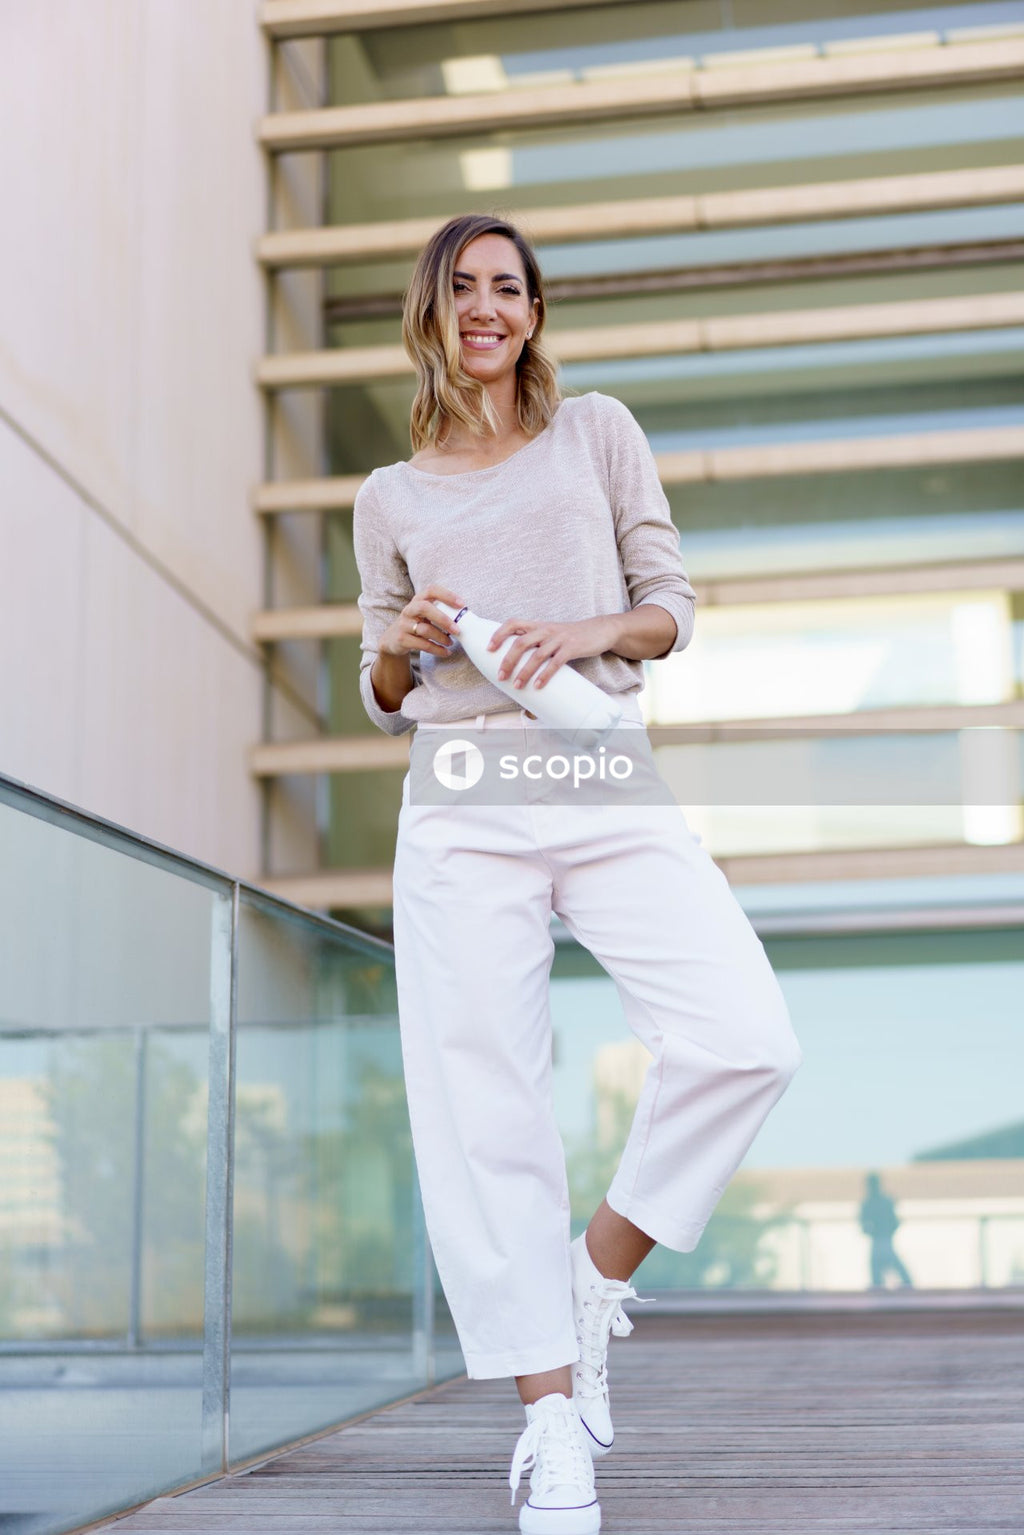 Woman in white long sleeve shirt and white pants standing on gray concrete stairs